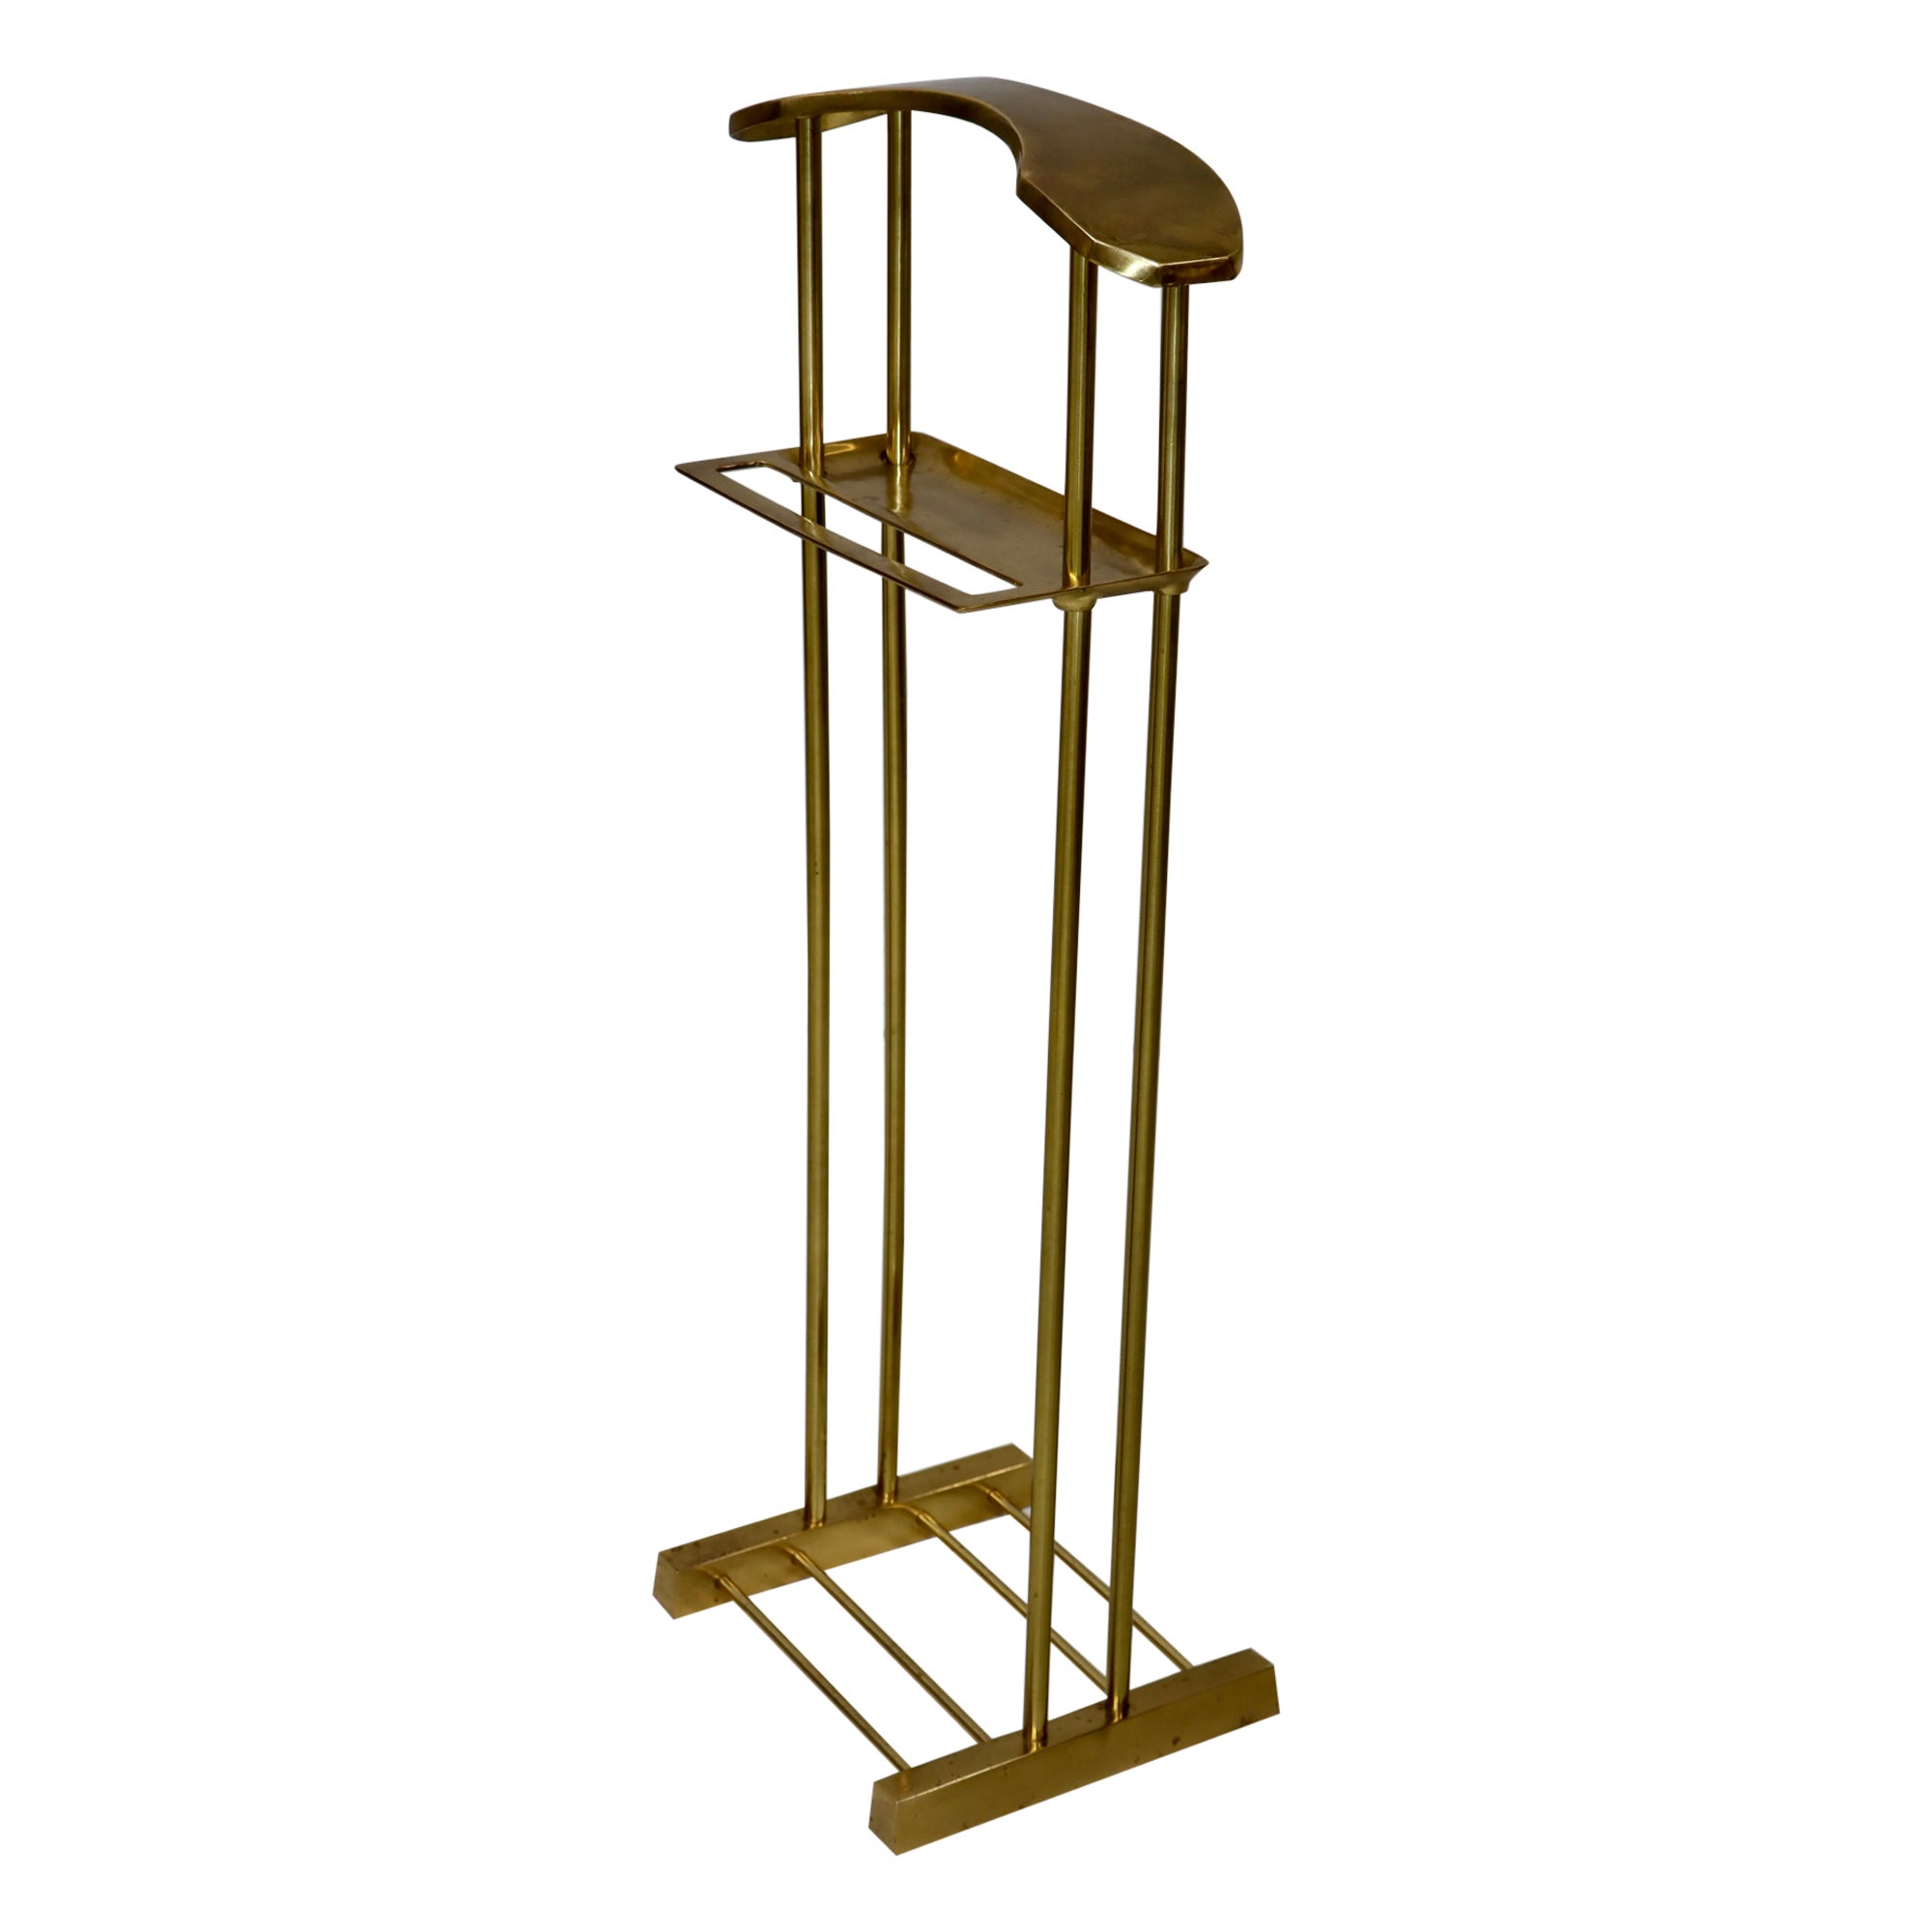 1980's Modernist Brass Valet Stand By Decorative Crafts Inc. For Sale